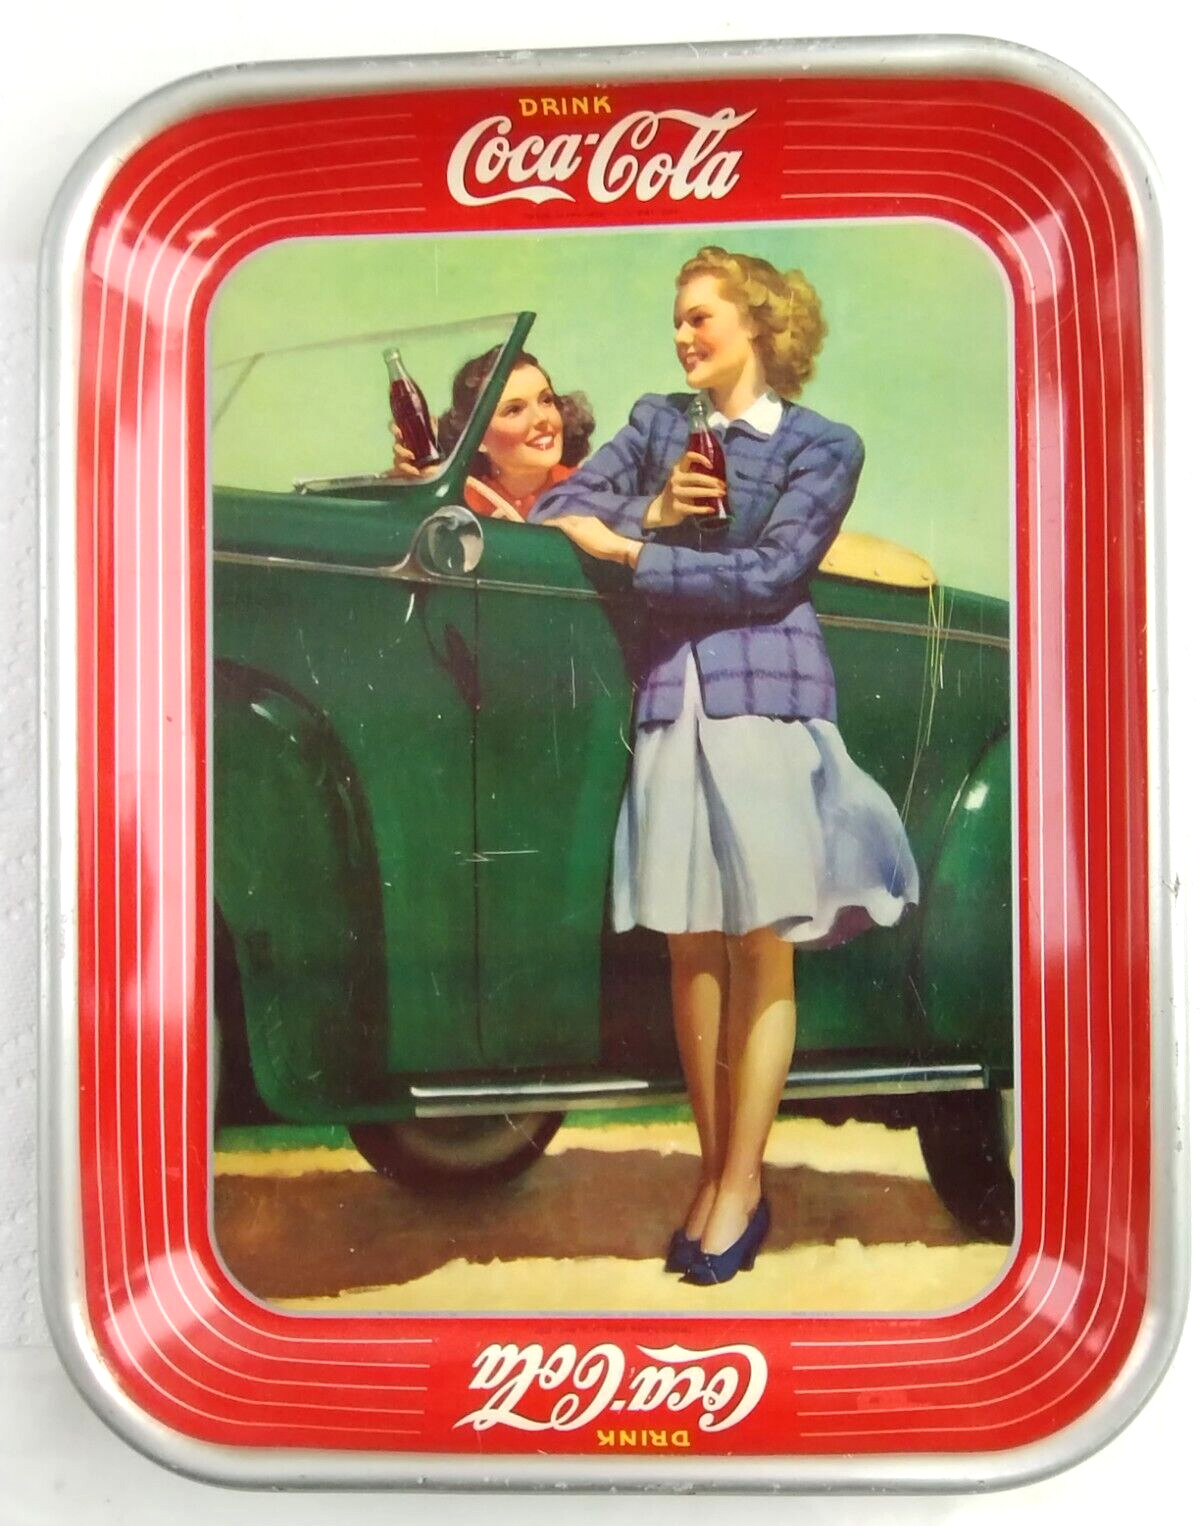 Vintage Coca Cola Tray 1942 Two Girls at Car Roadster Original Coke Serving Tray